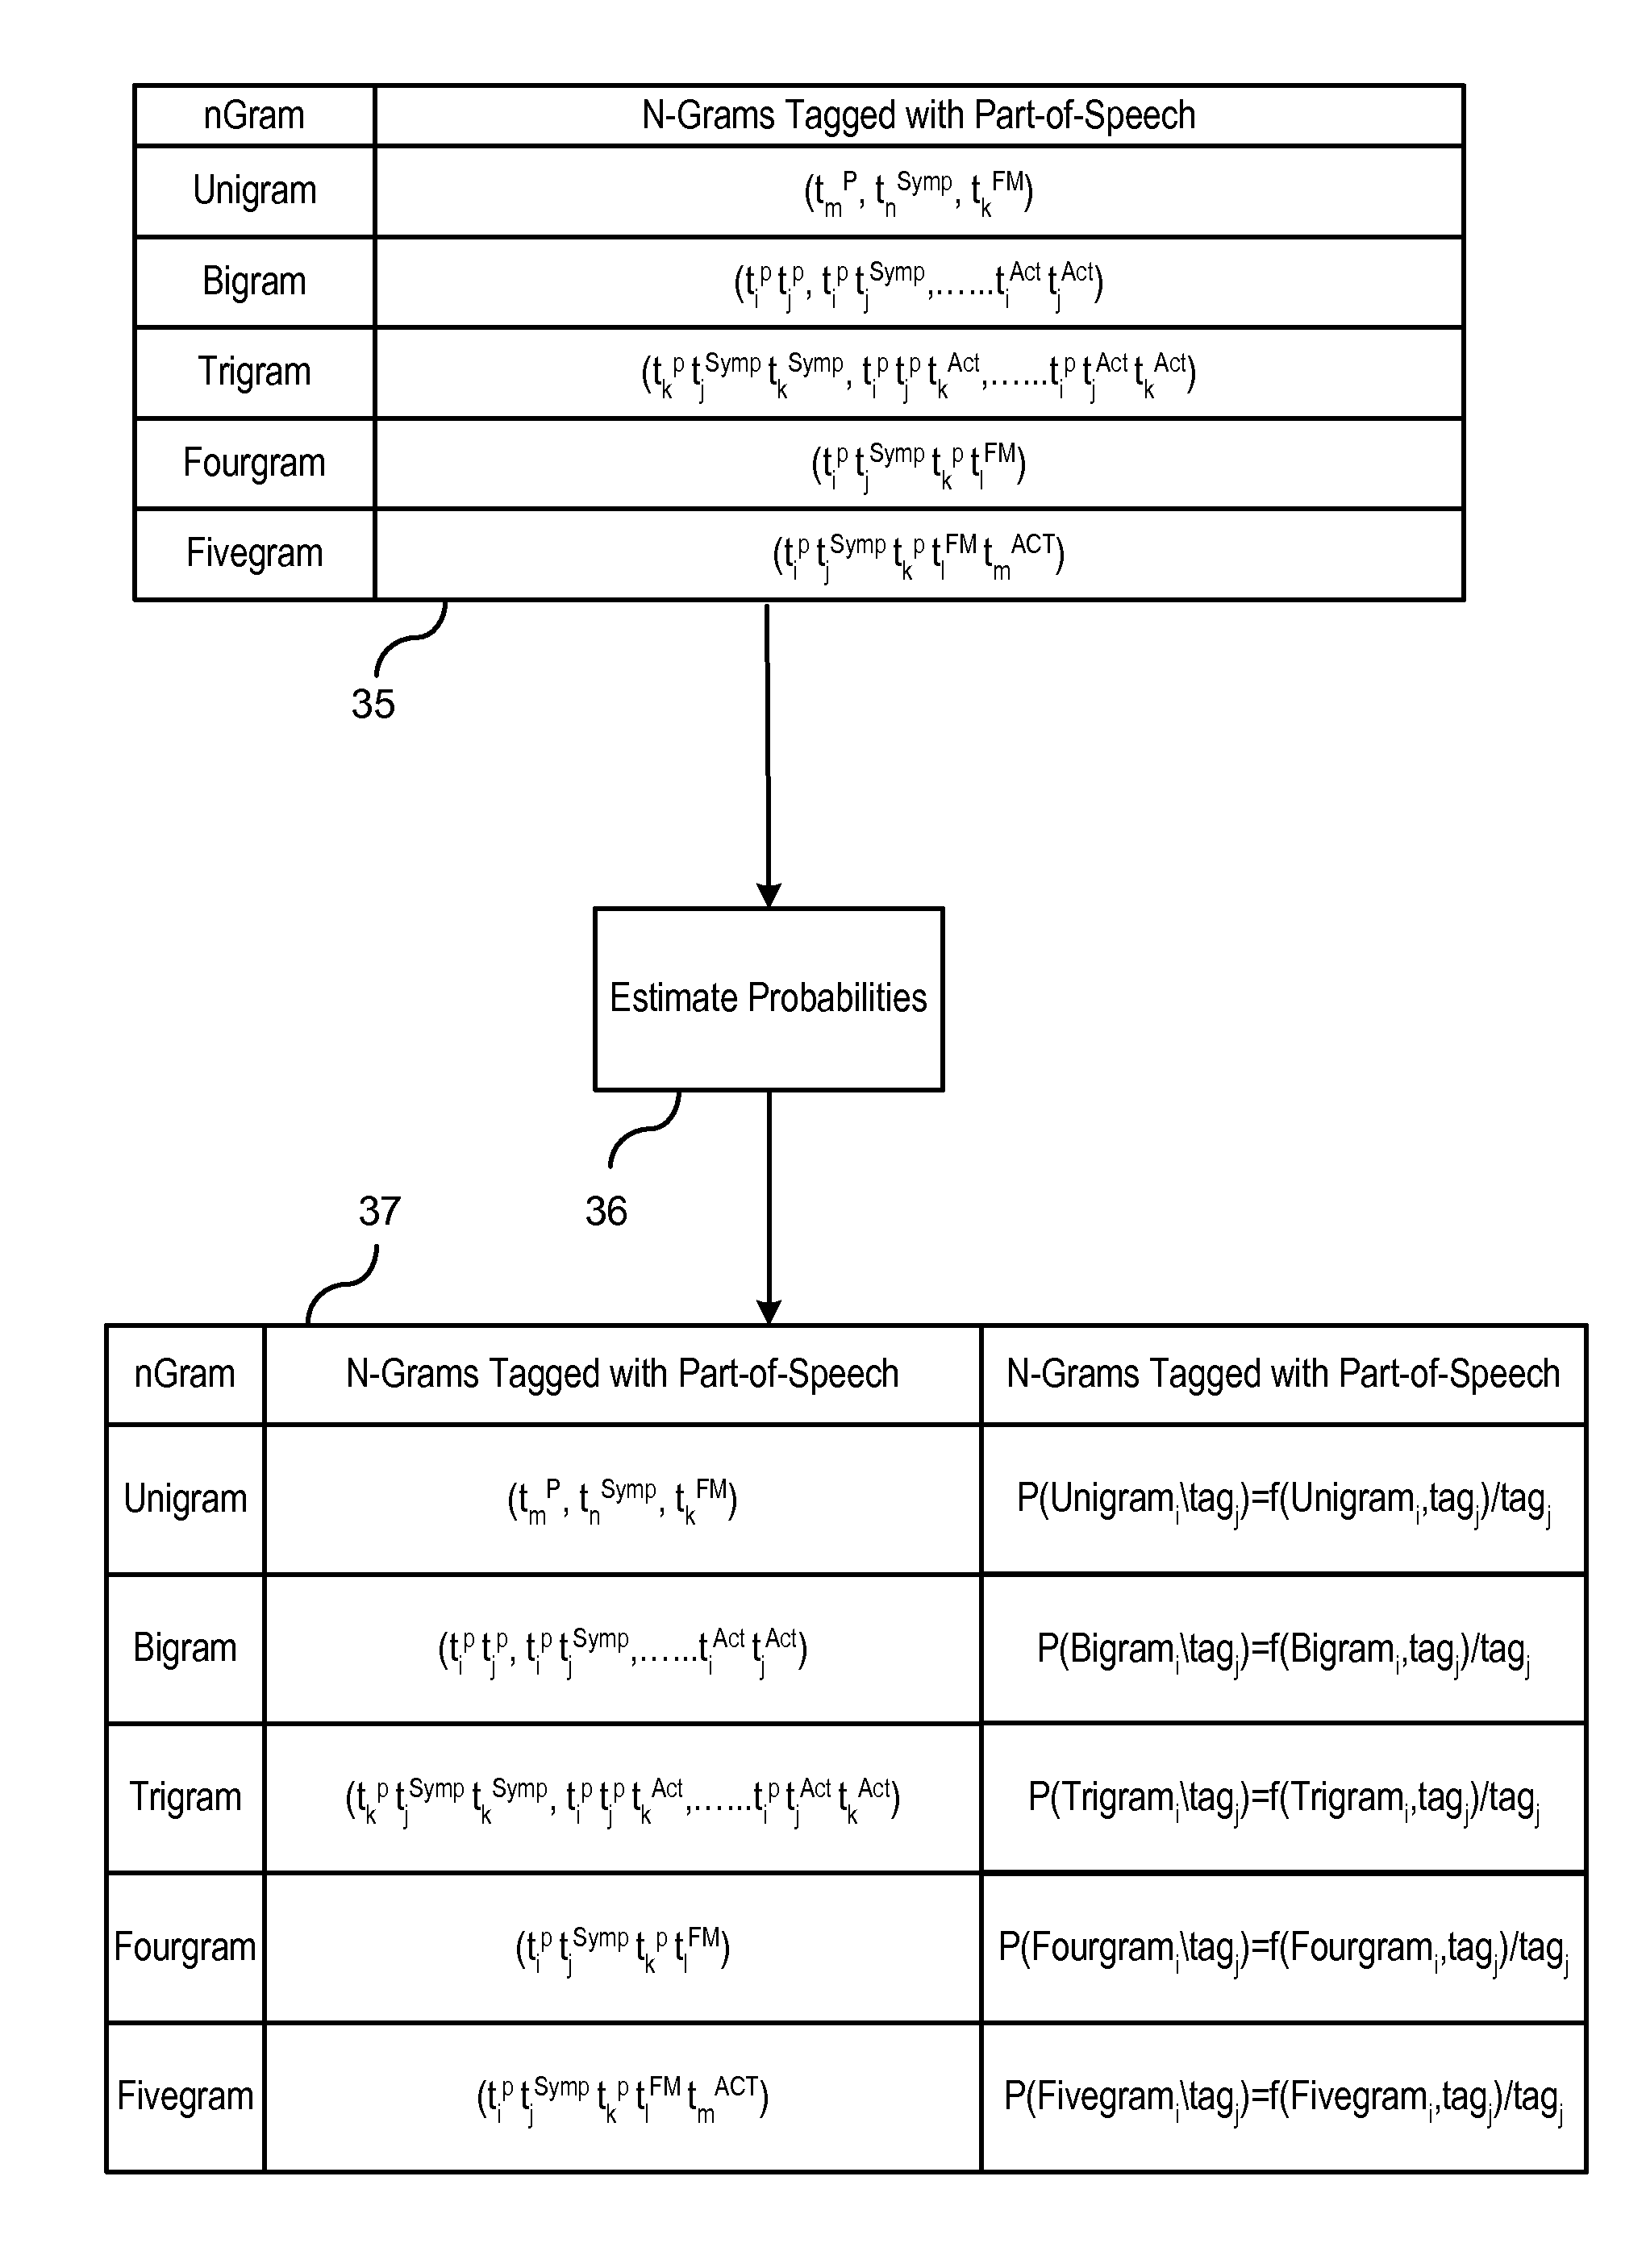 Automatic linking of requirements using natural language processing